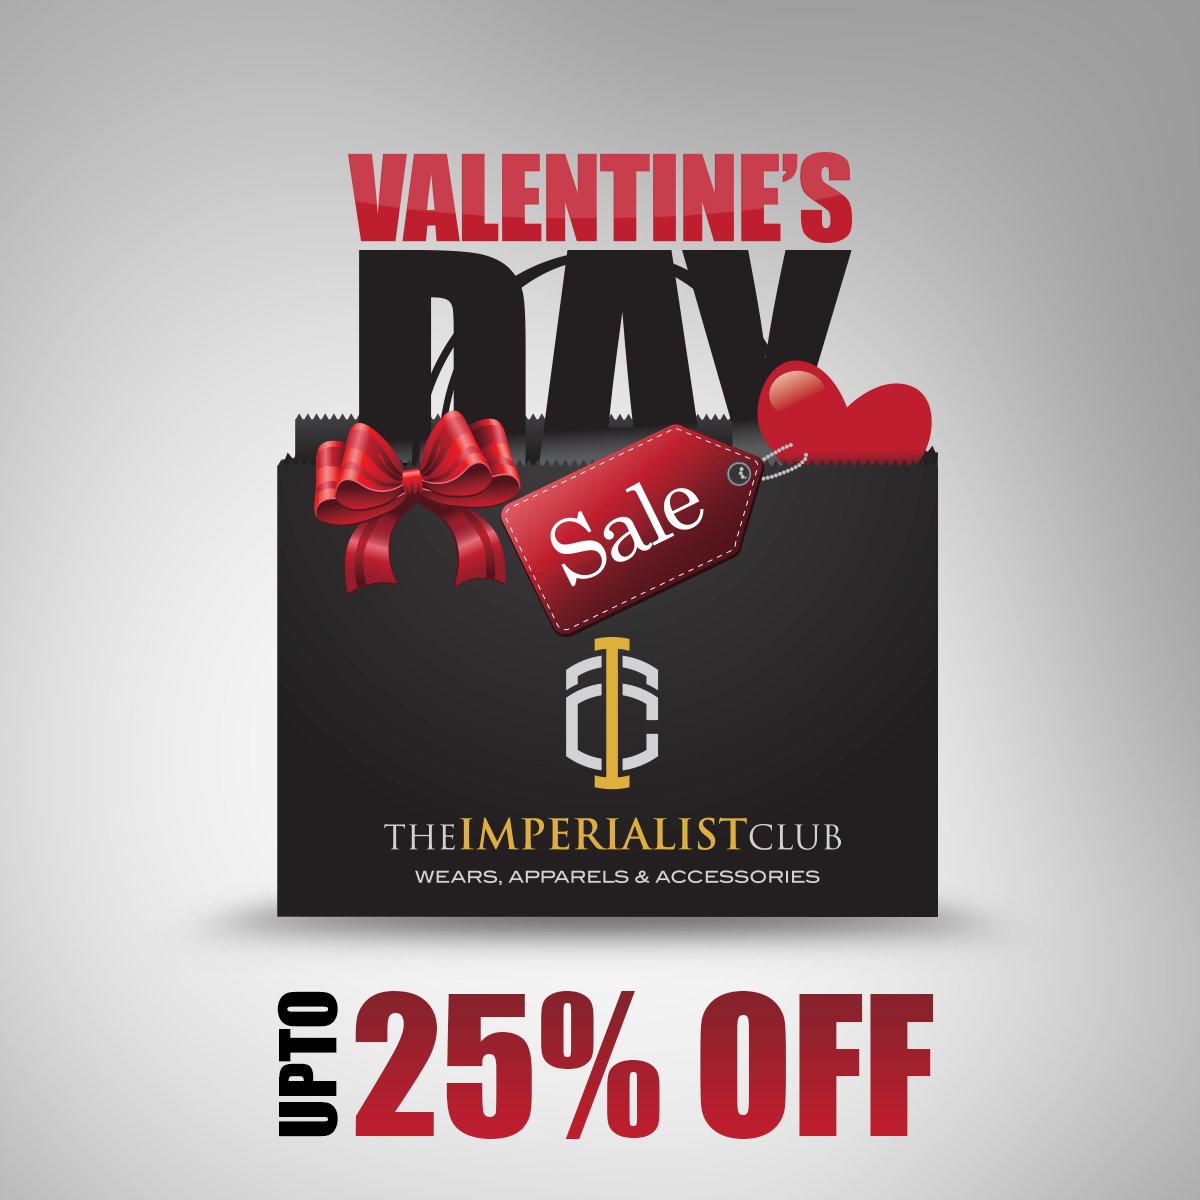 This Valentines Day enjoy a special UPTO 25% OFF! Women this is your chance to buy him the best!

Shop Online Today: theimperialistclub.com

#ForHim #ValentinesDiscount #VDay #VDayDiscount #Valentines #Dubai #ValentinesInDubai #DubaiShopping #DubaiMen #MyDubai #DubaiShoes #Bags